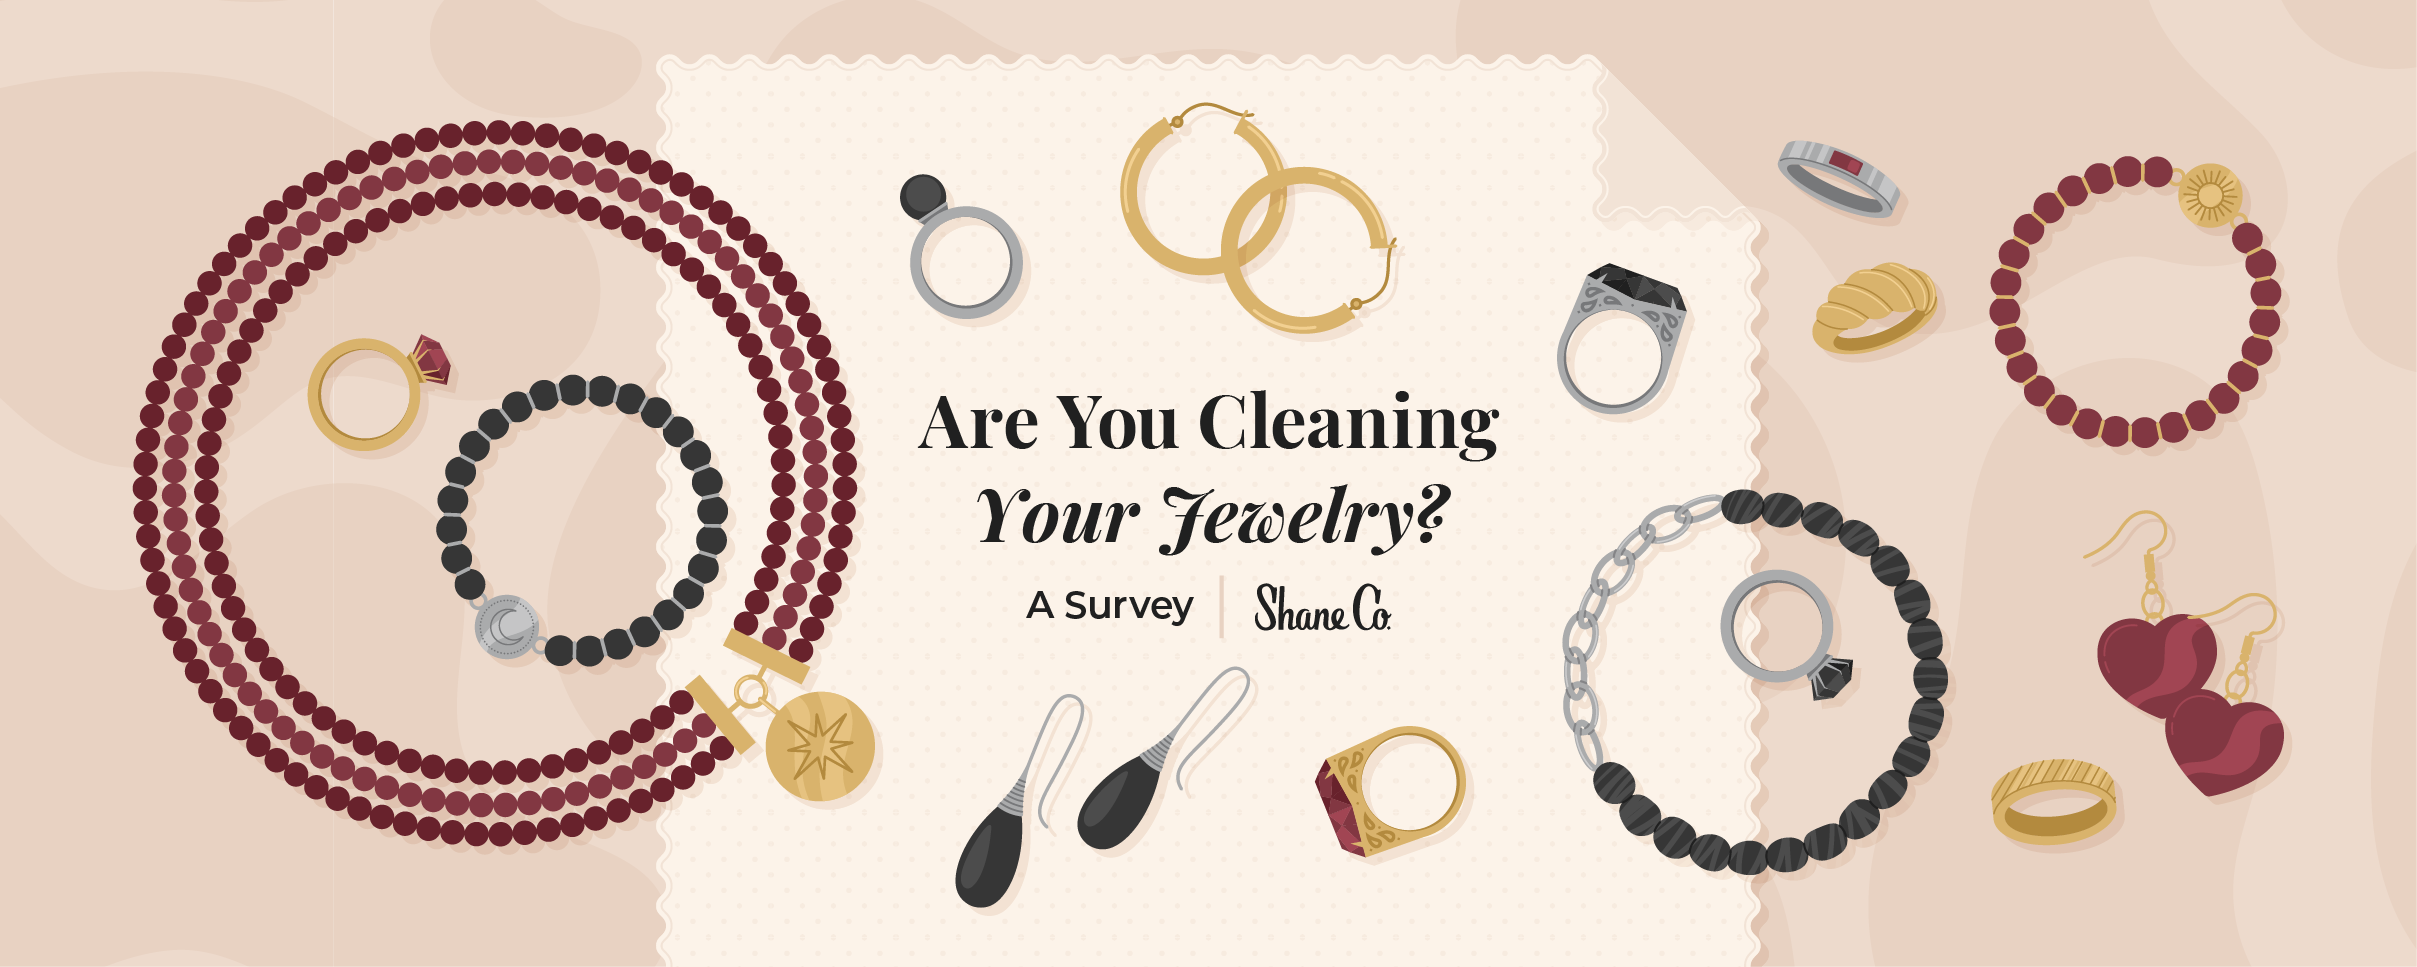 How (and When) to Clean Your Jewelry